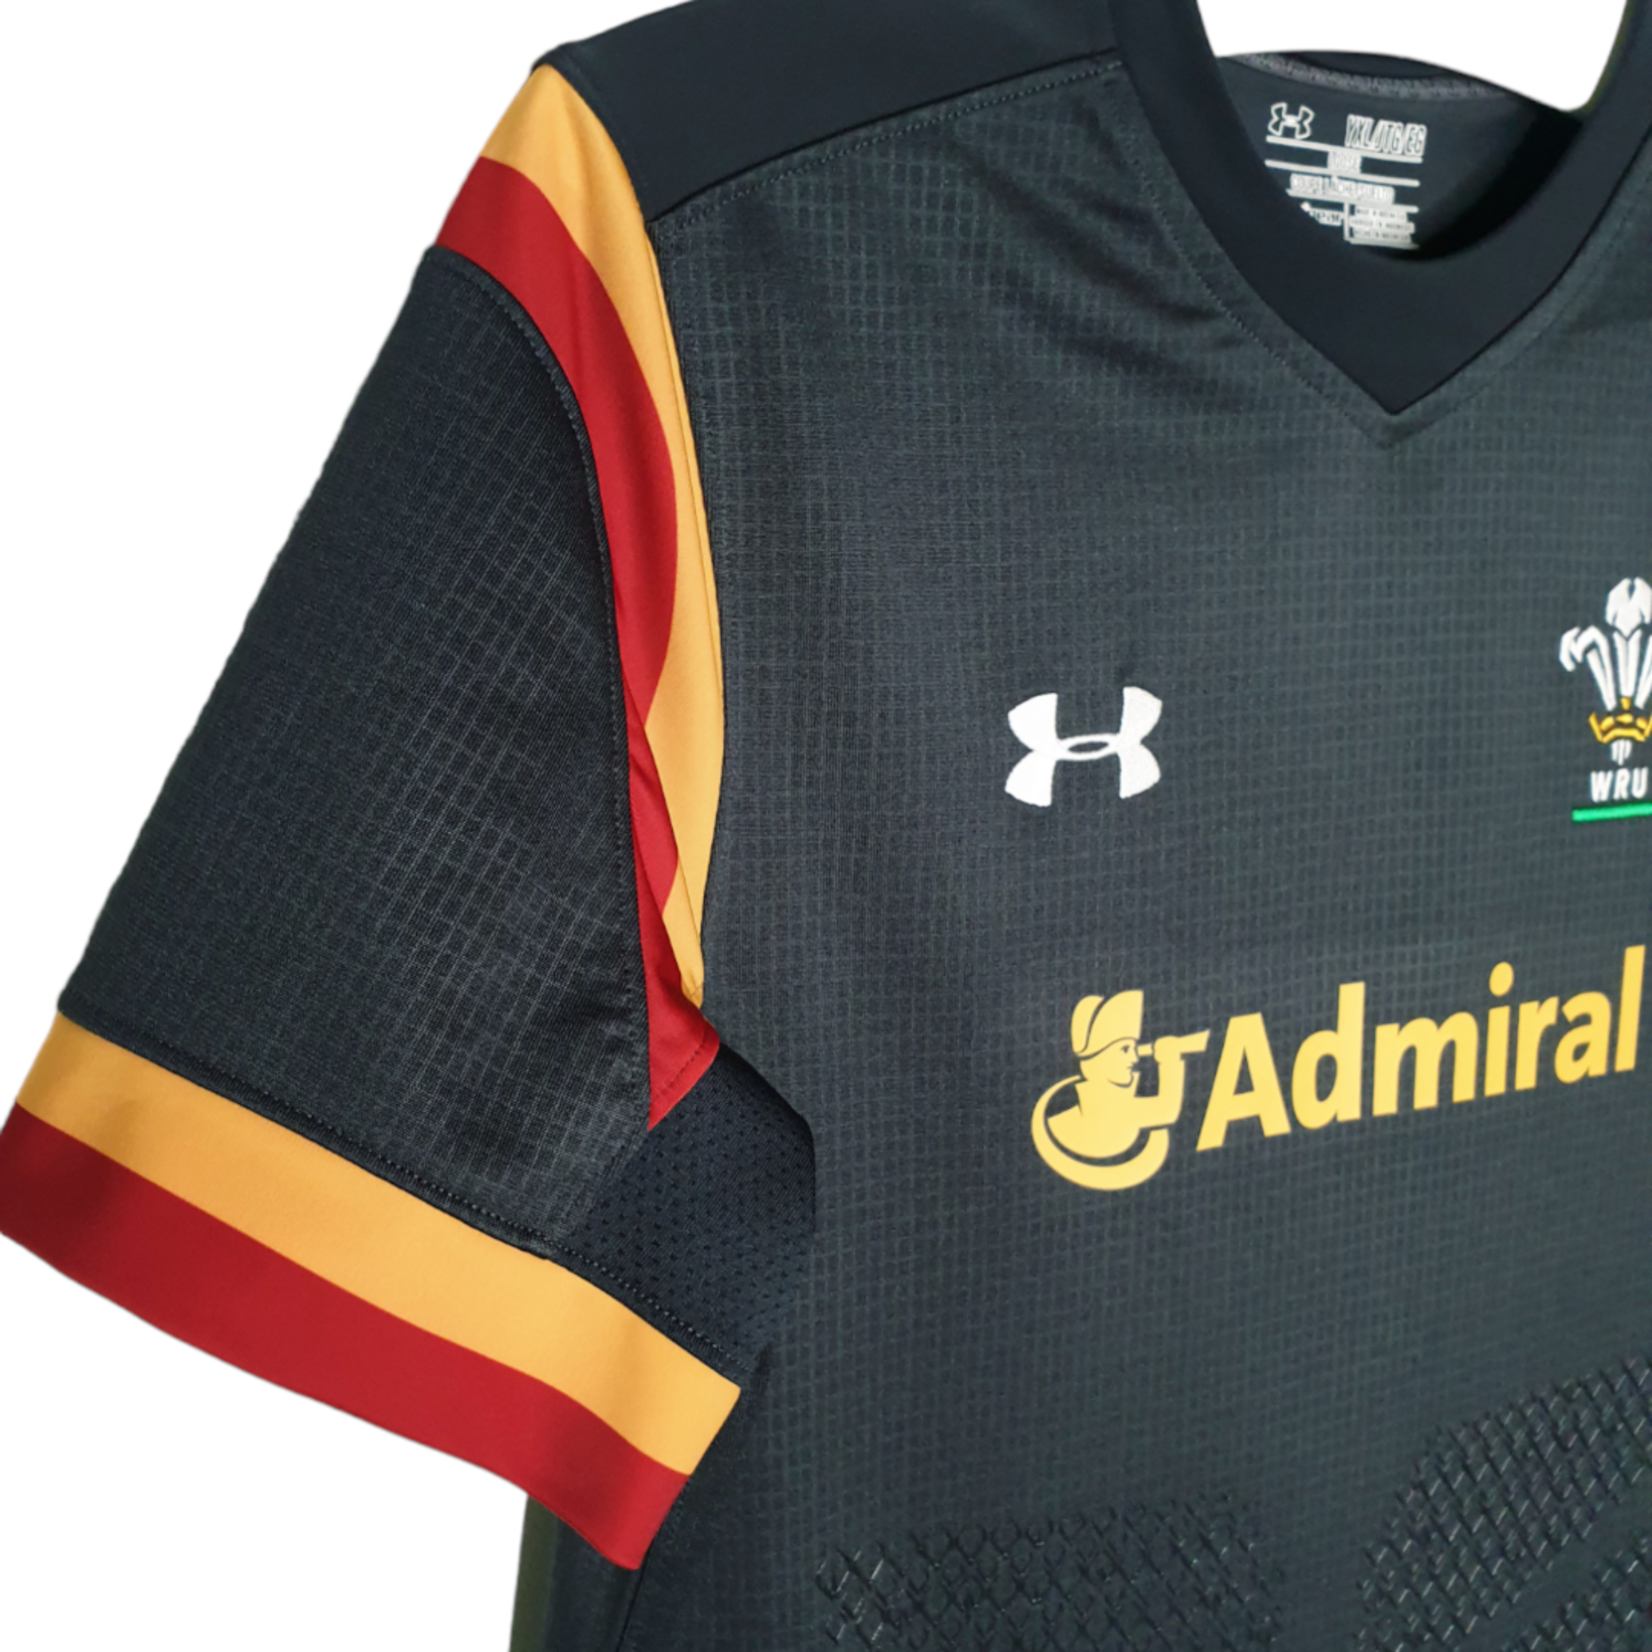 Under Armour Origineel Under Armour vintage rugby shirt Wales 2015